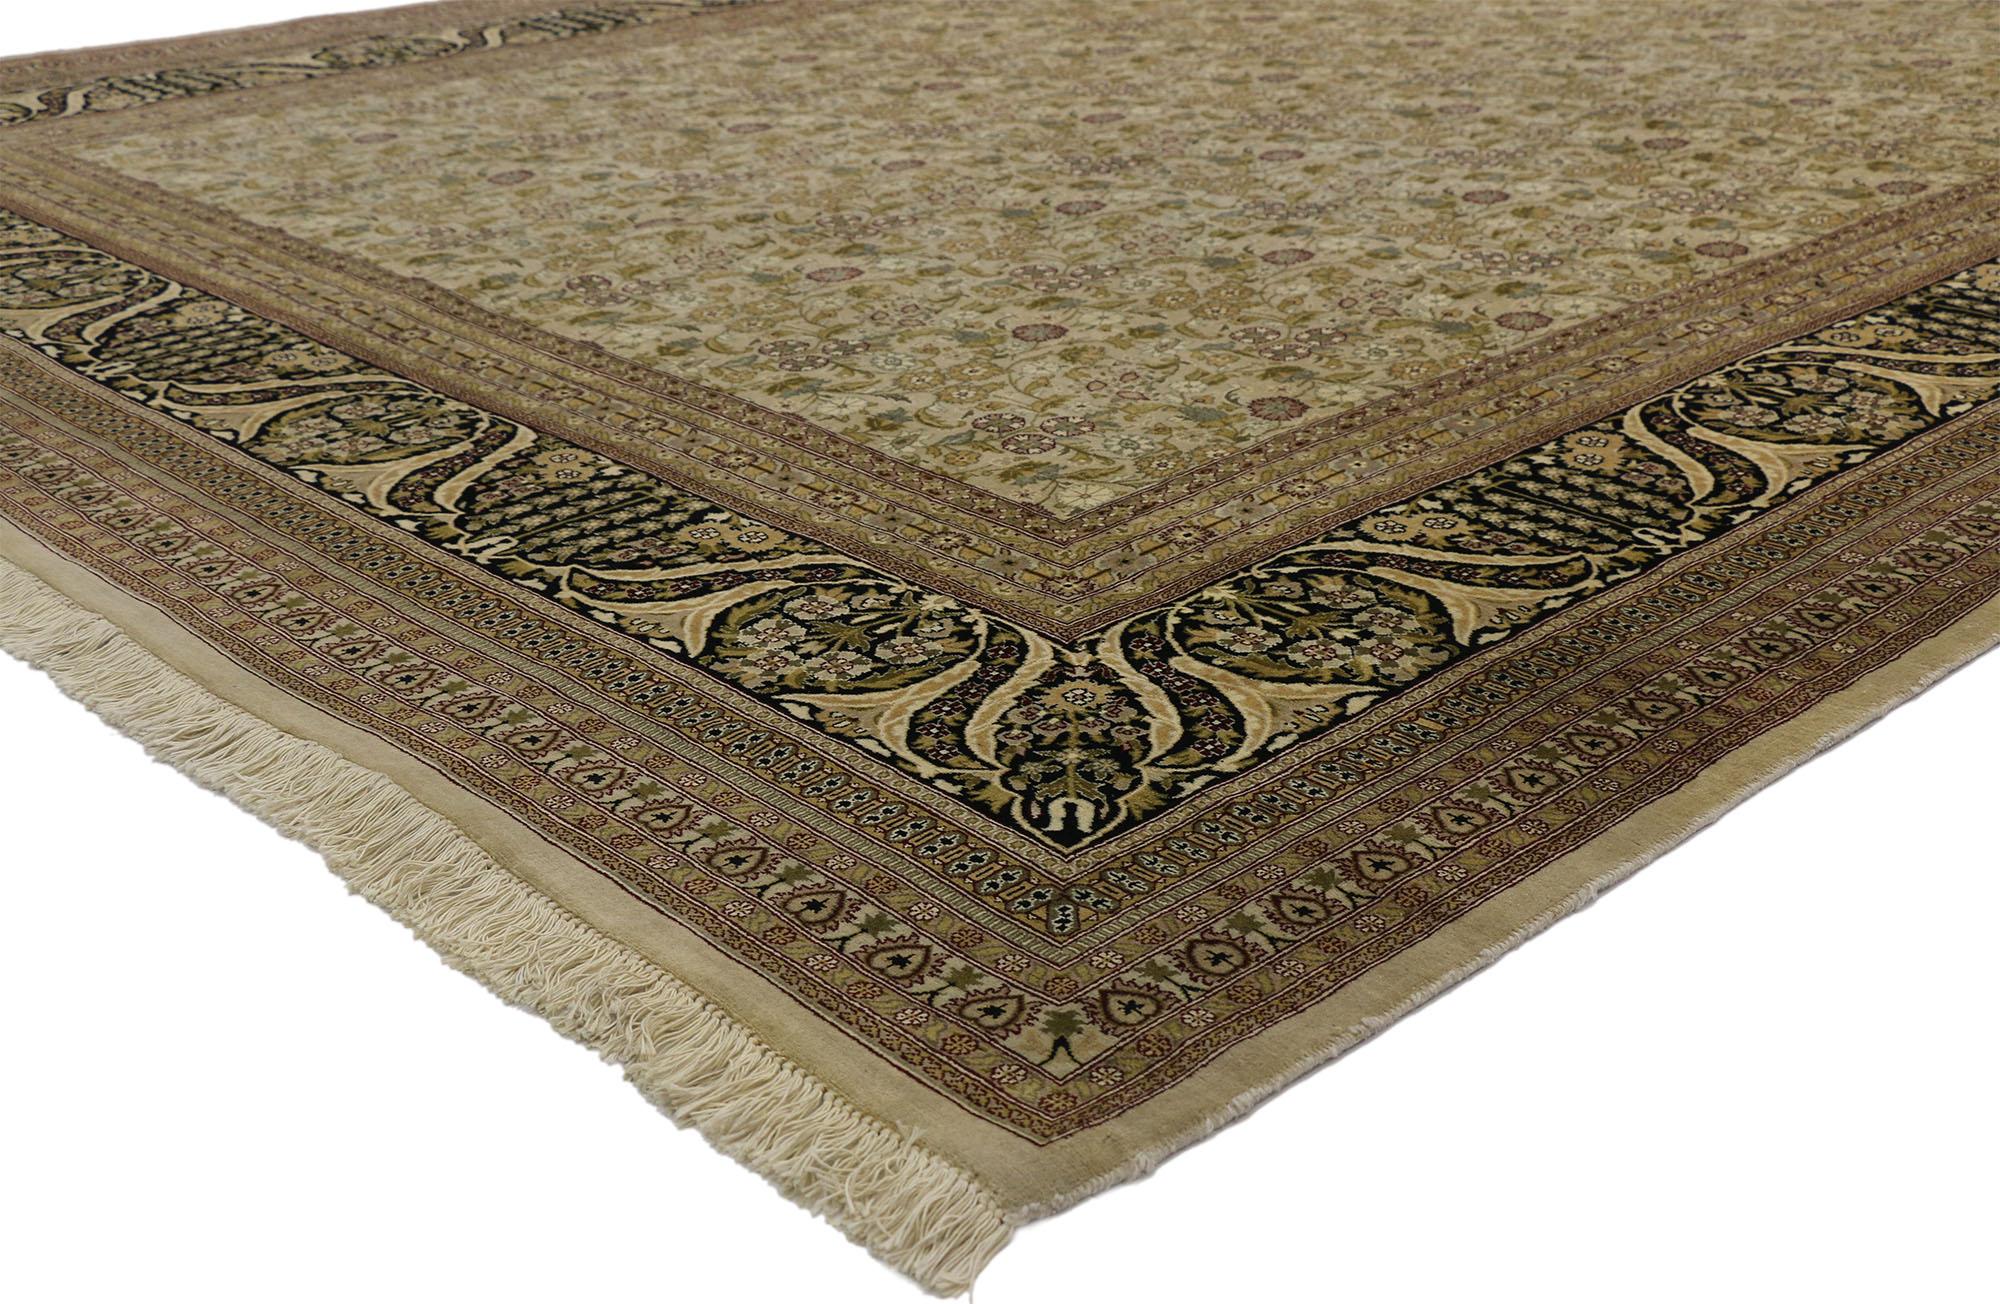 77250 Vintage Pakistani Traditional Area Rug with Arts & Crafts William Morris Style 10'00 x 13'09. The architectural elements of naturalistic forms combined with Arts and Crafts style, this hand-knotted wool vintage traditional area rug draws